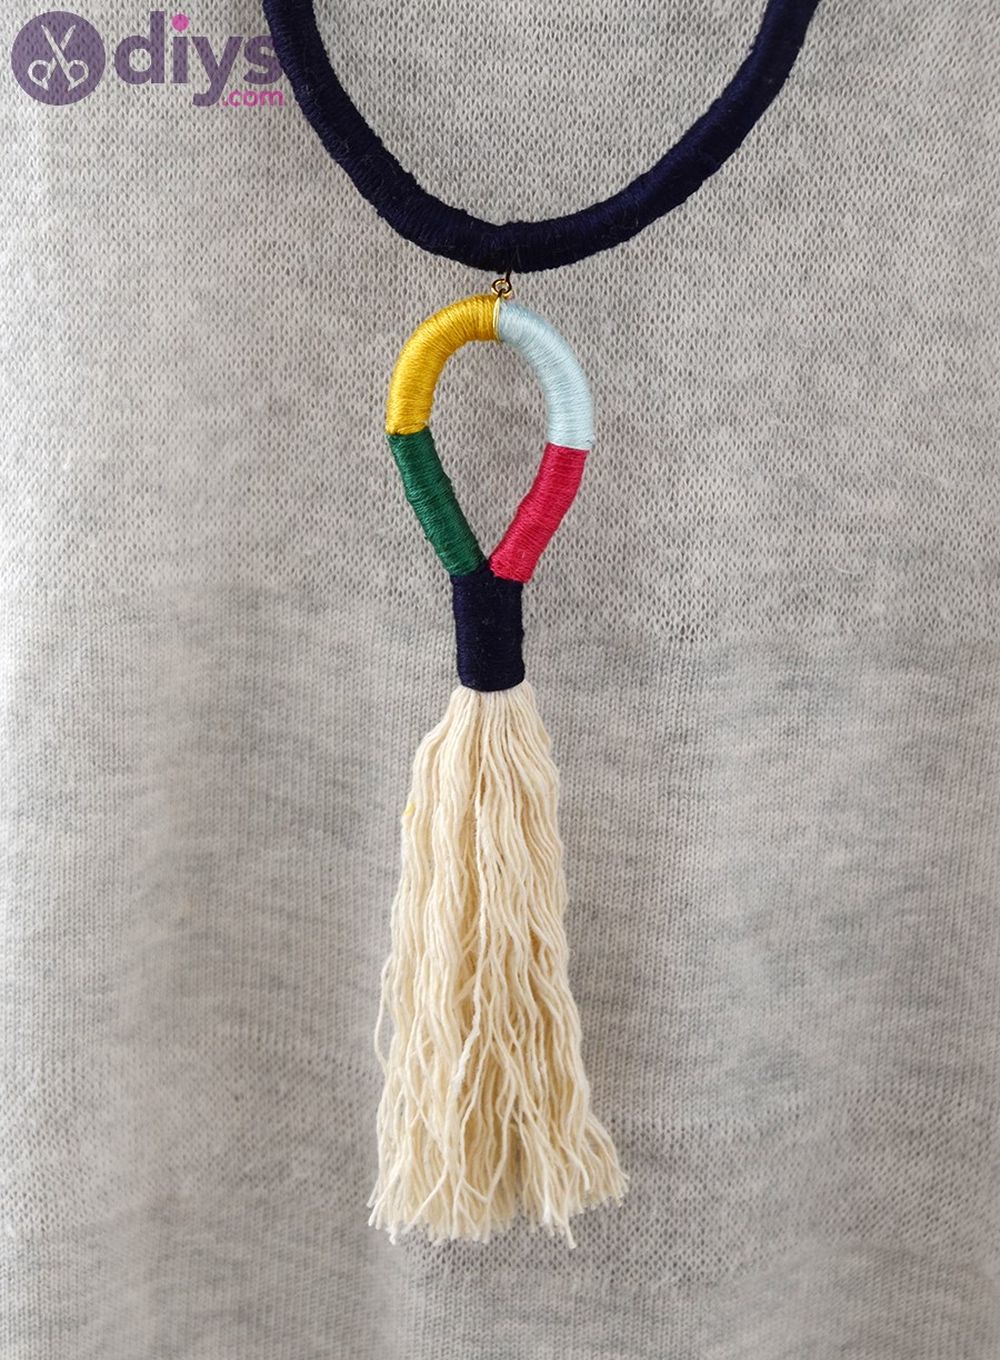 Easy diy colorful tassel necklace what to get wife for christmas